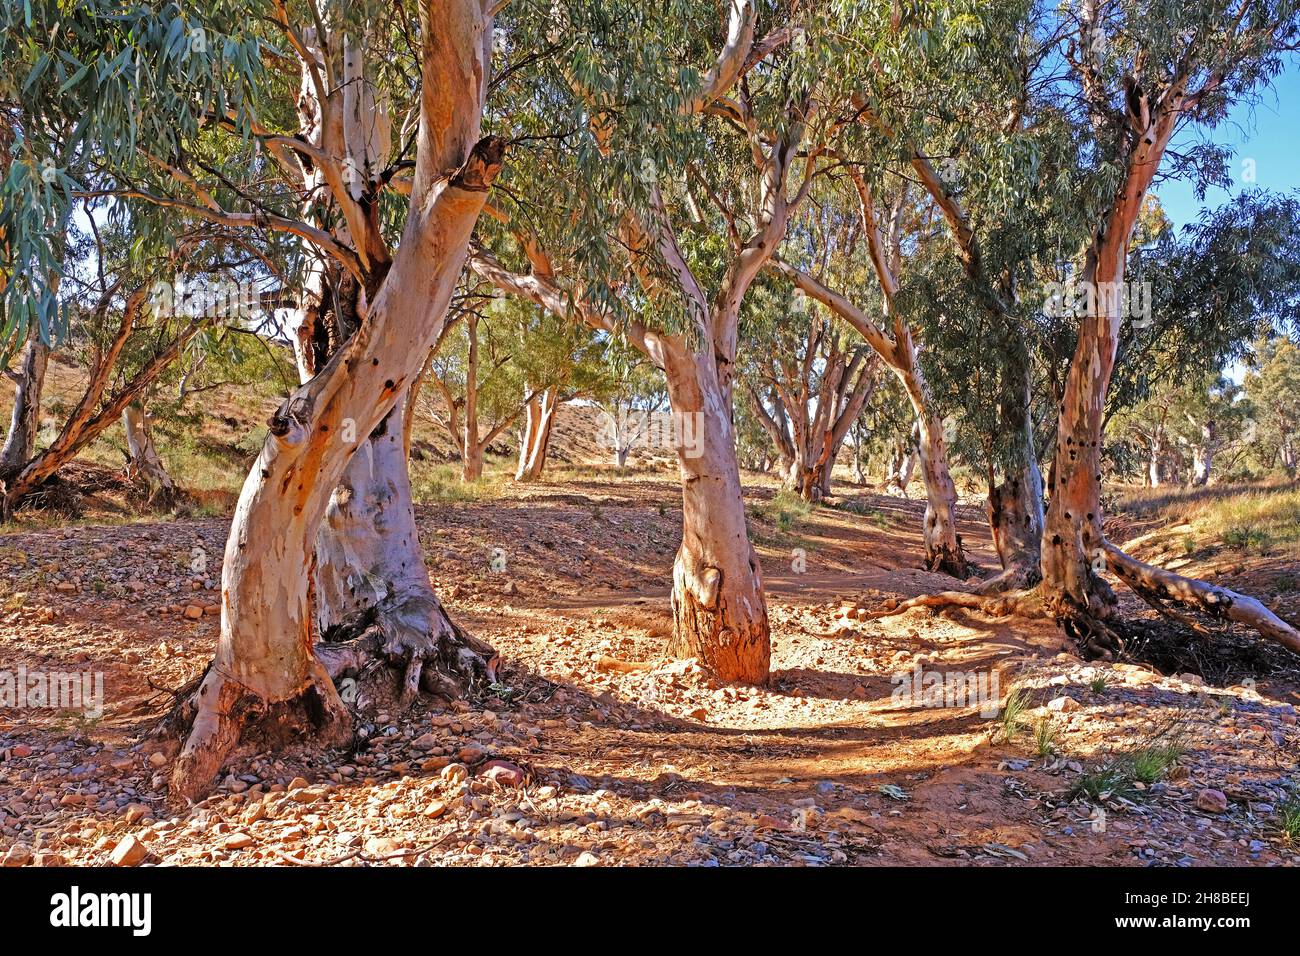 River Red Gums standing in a dry creek bed near Kanyaka Homestead Ruins in the Flinders Ranges in Australia Stock Photo